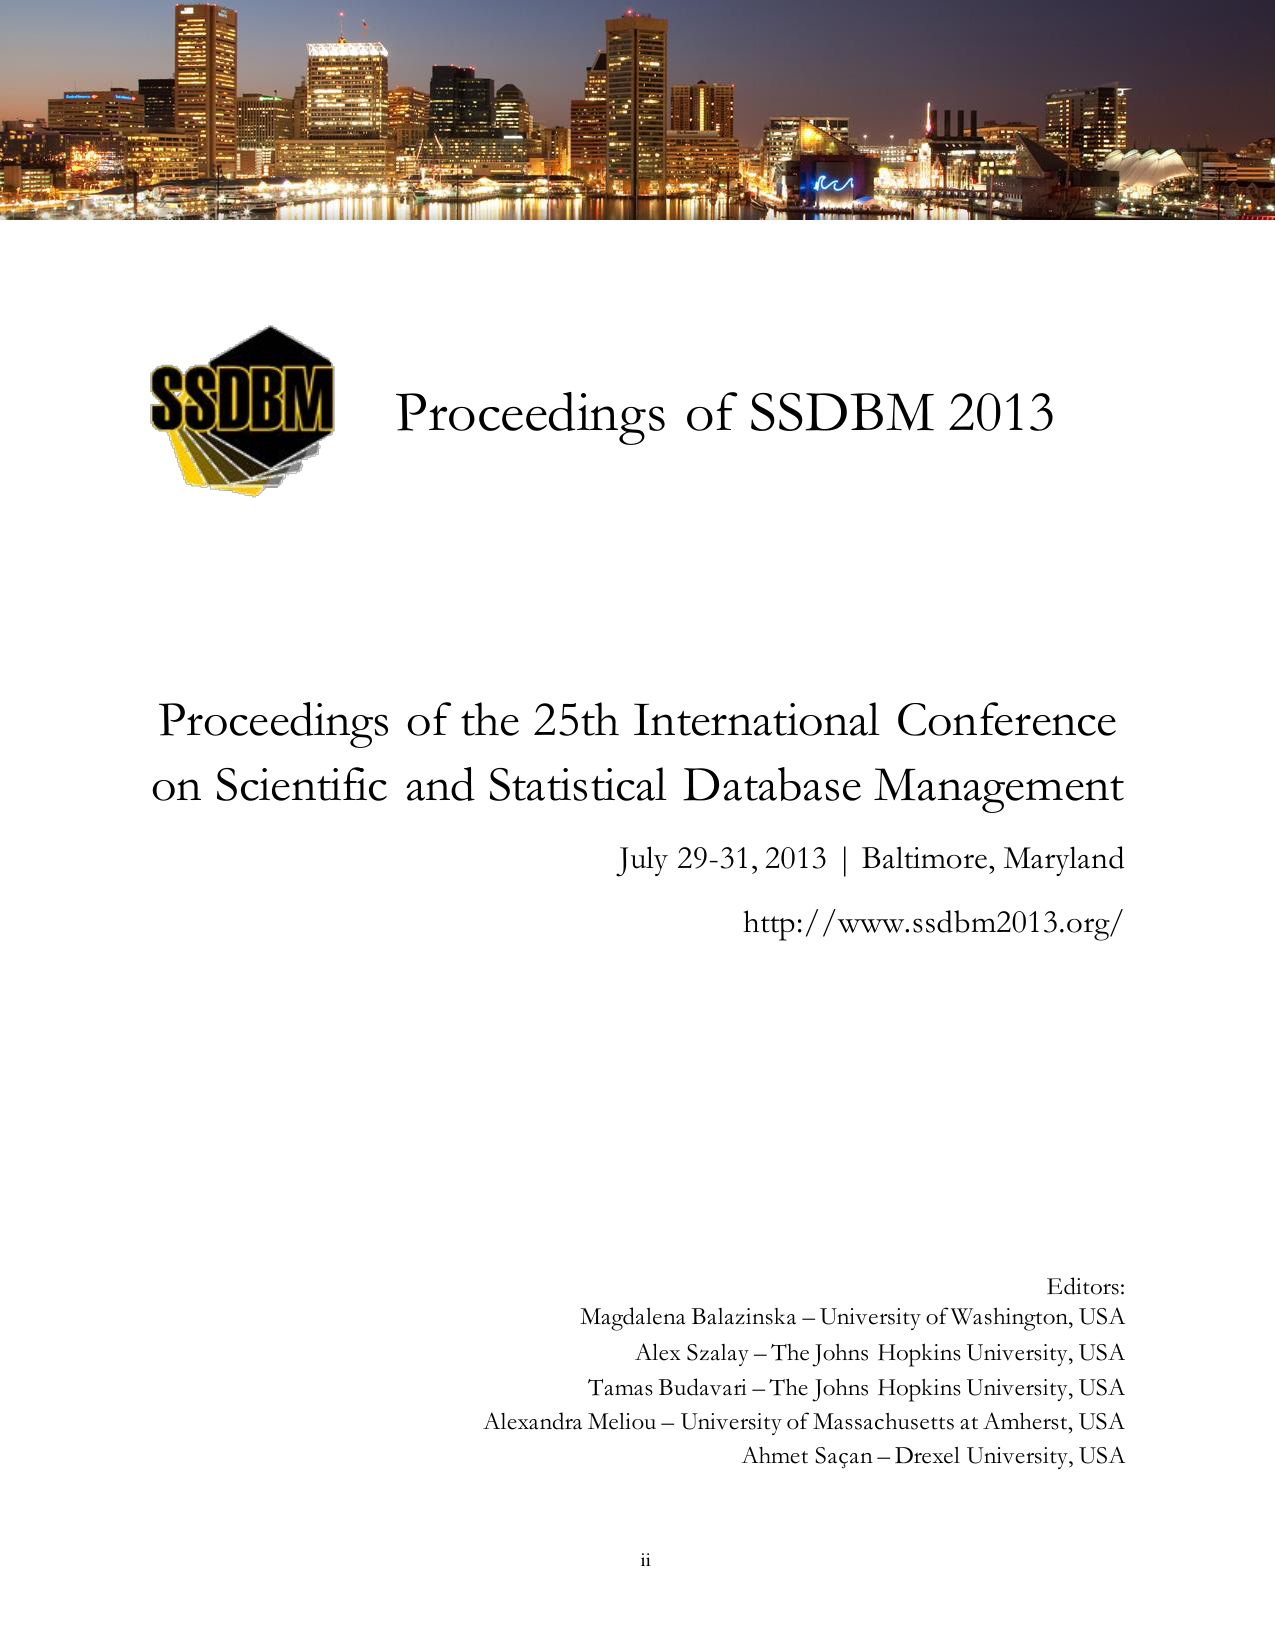 cover_ssdbm_2013.png